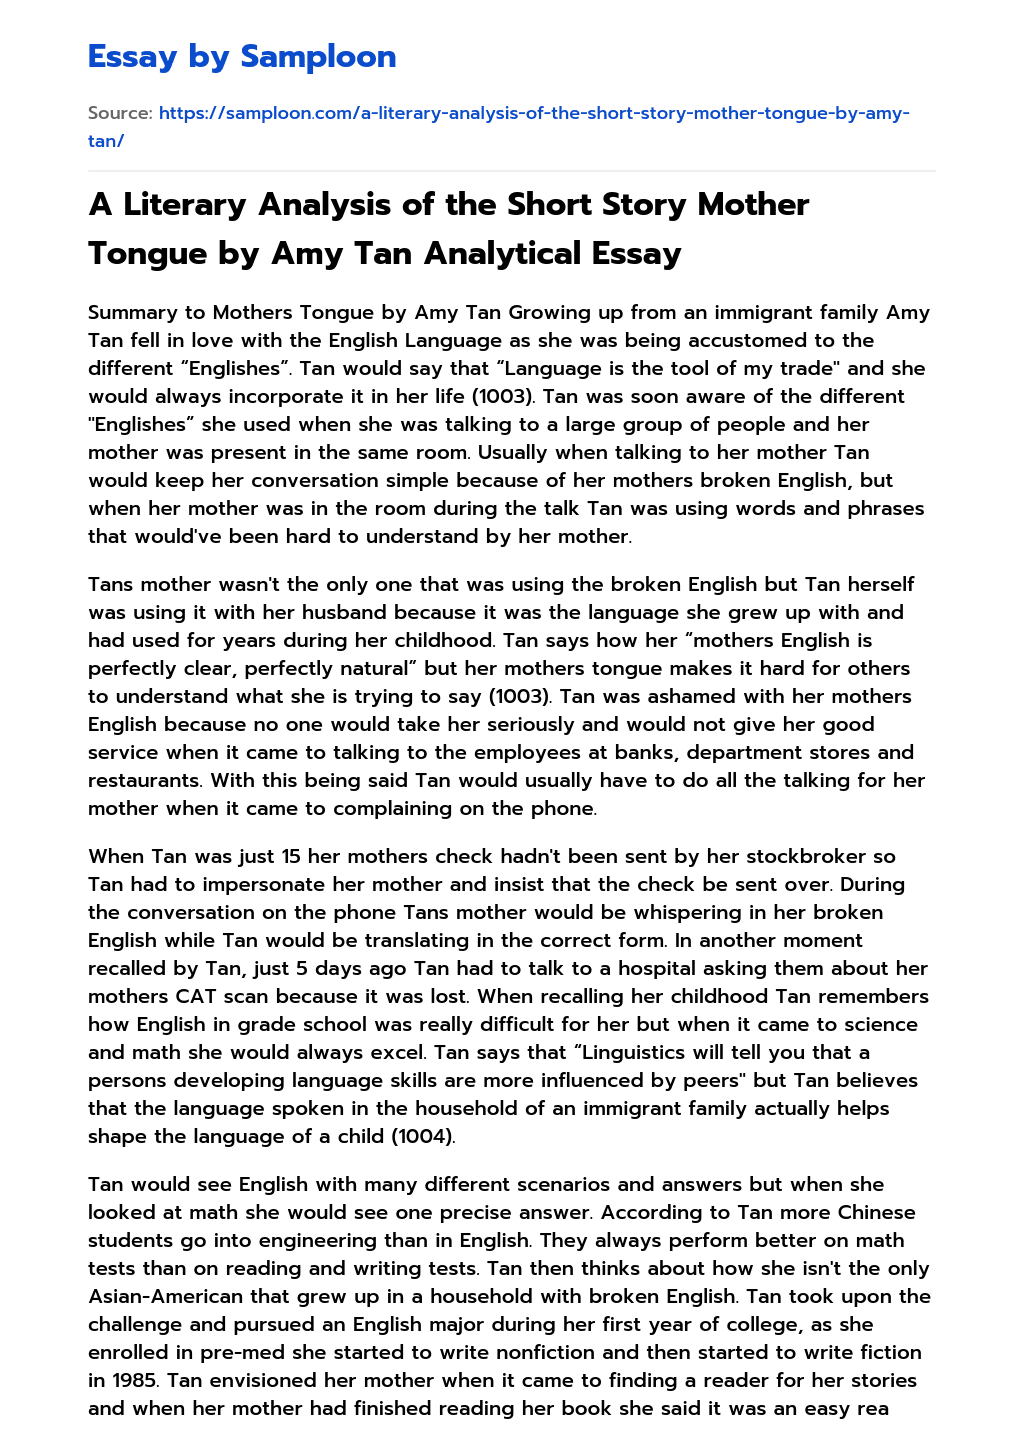 A Literary Analysis of the Short Story Mother Tongue by Amy Tan Analytical Essay essay